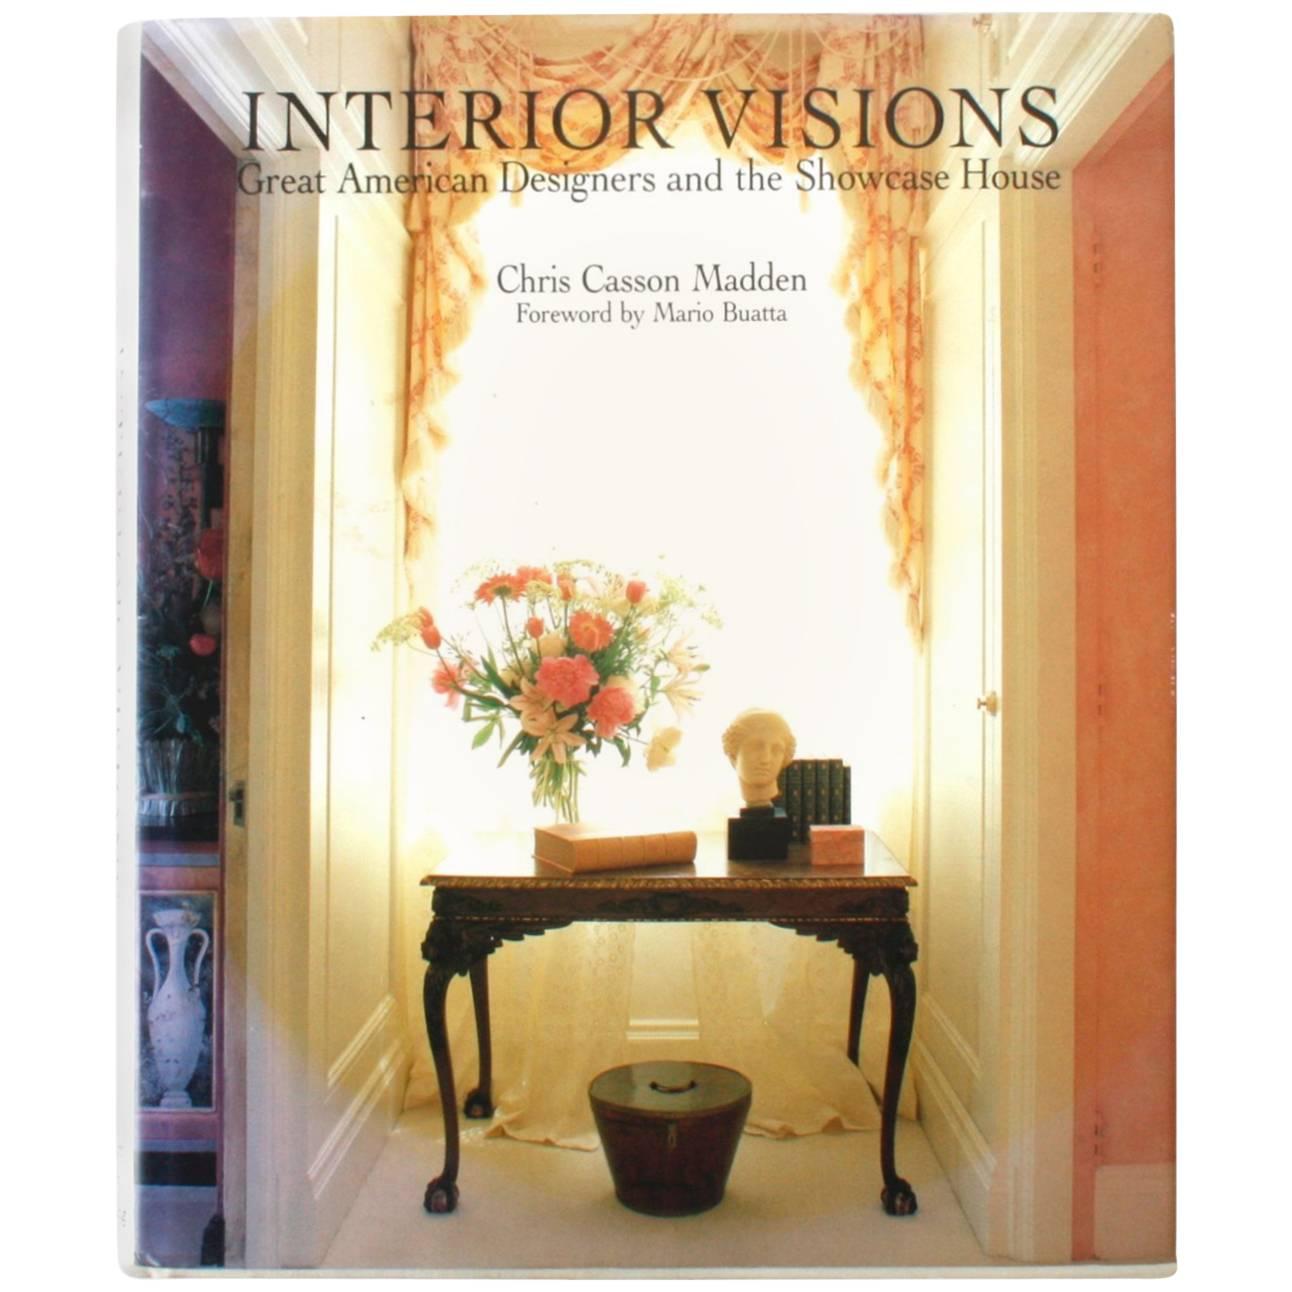 Interior Visions, Great American Designers and the Showcase House